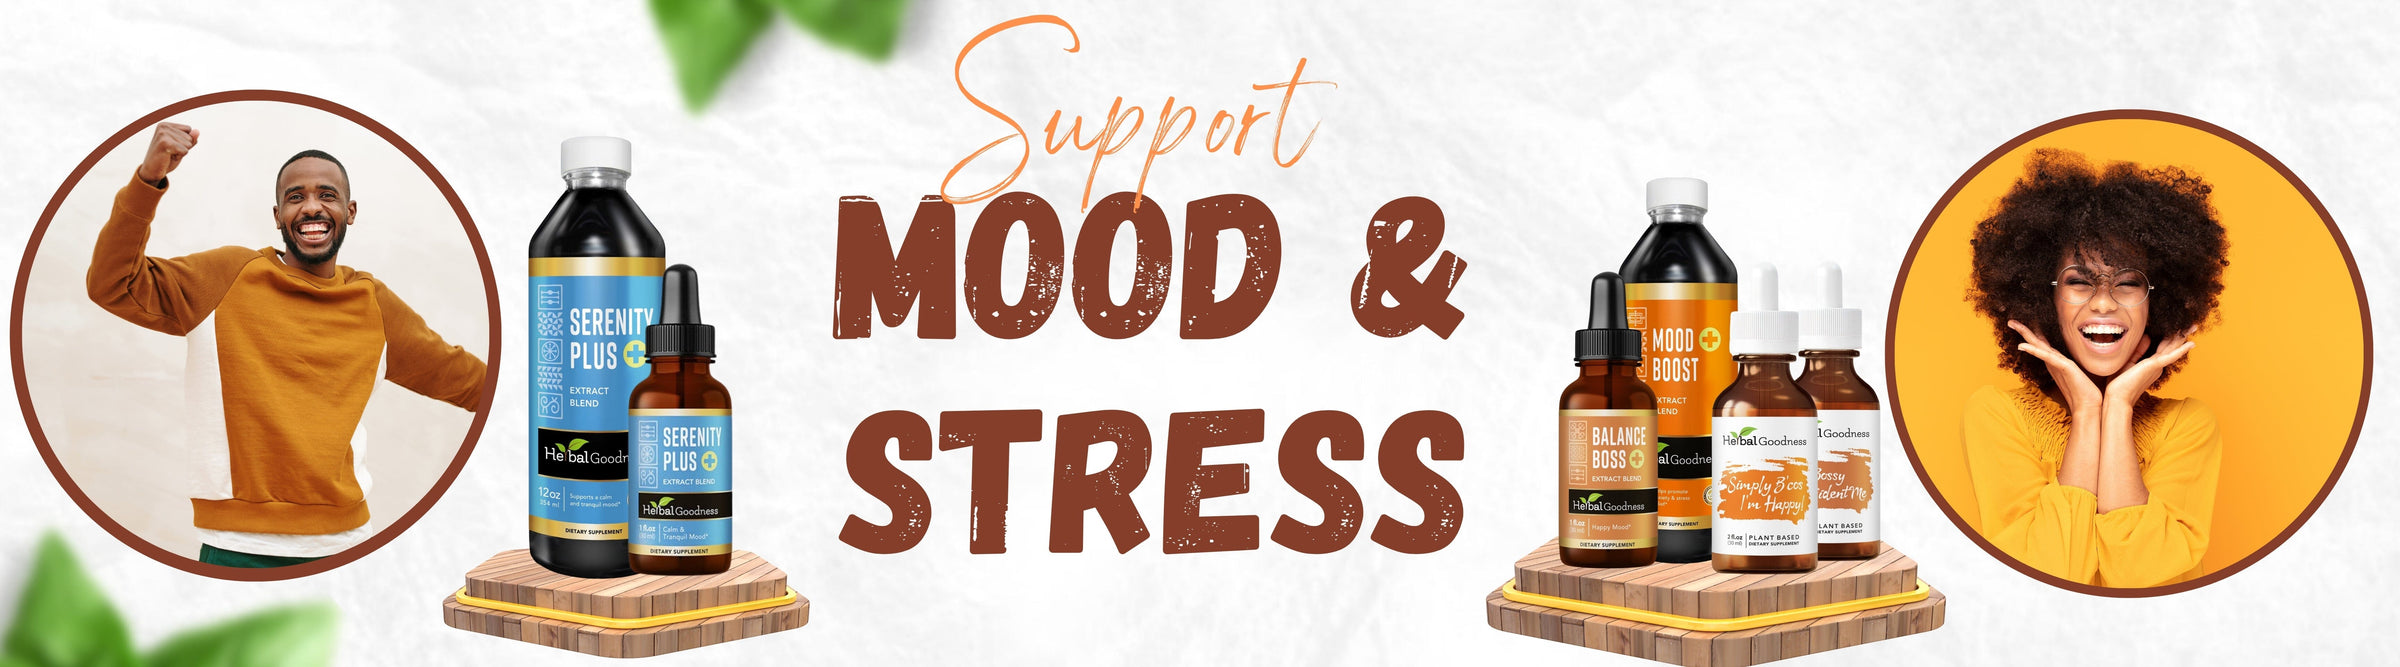 Mood & Stress Support